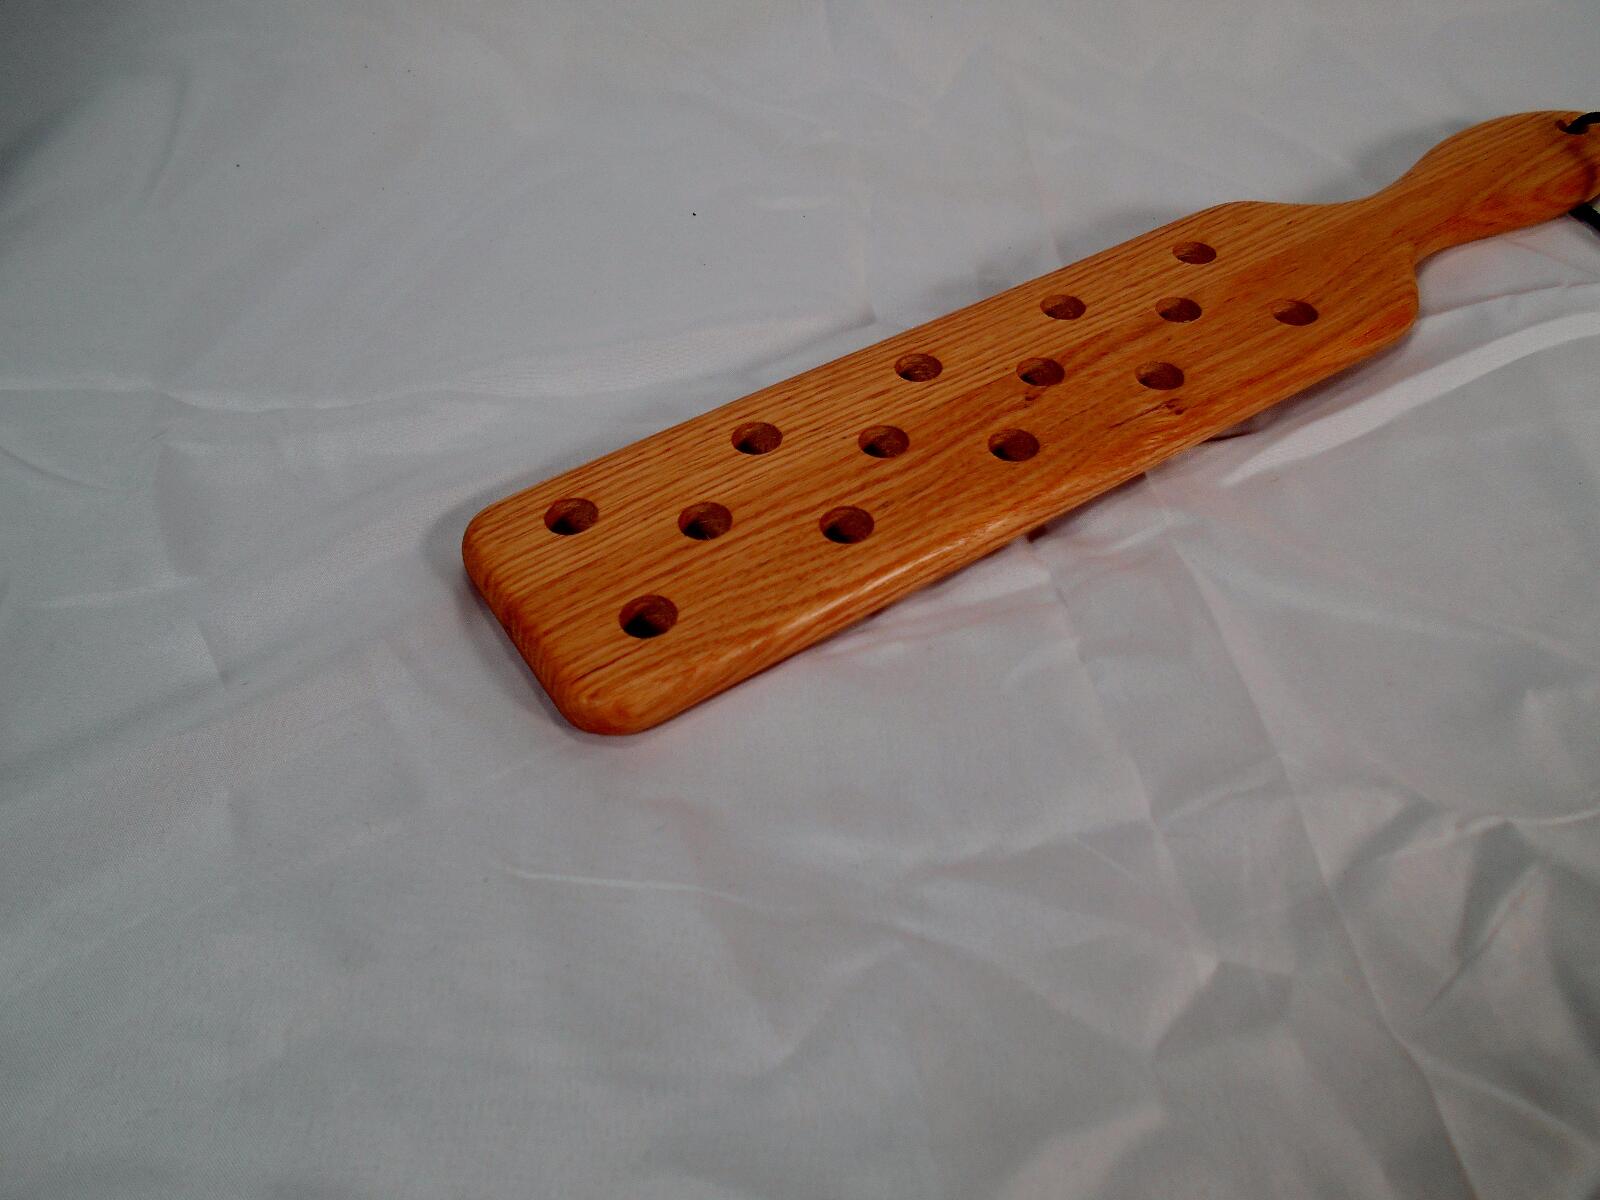 Spanking Paddle Solid no Holes, Wood Solid Spanking Paddle without Hol